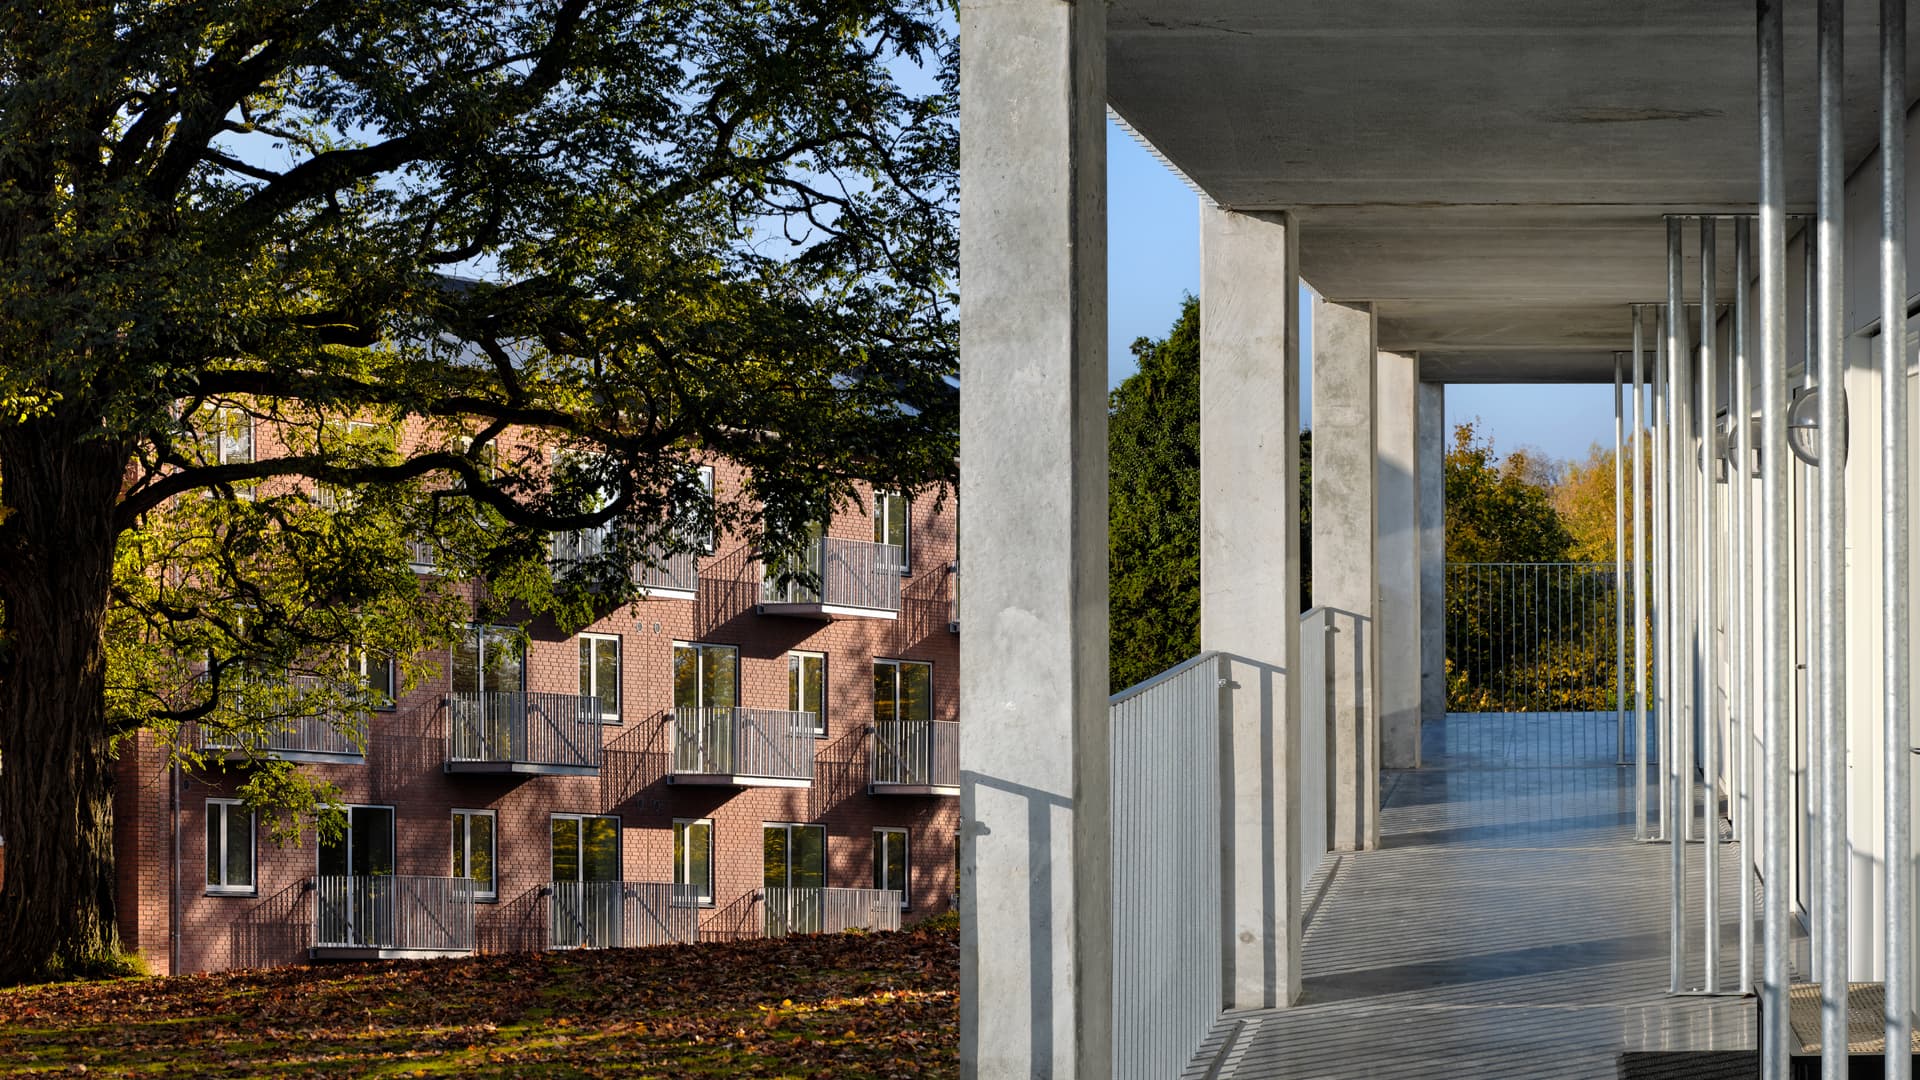 The public housing area of Frederiksborgvænget has been completely renovated to preserve and future-proof the old buildingse